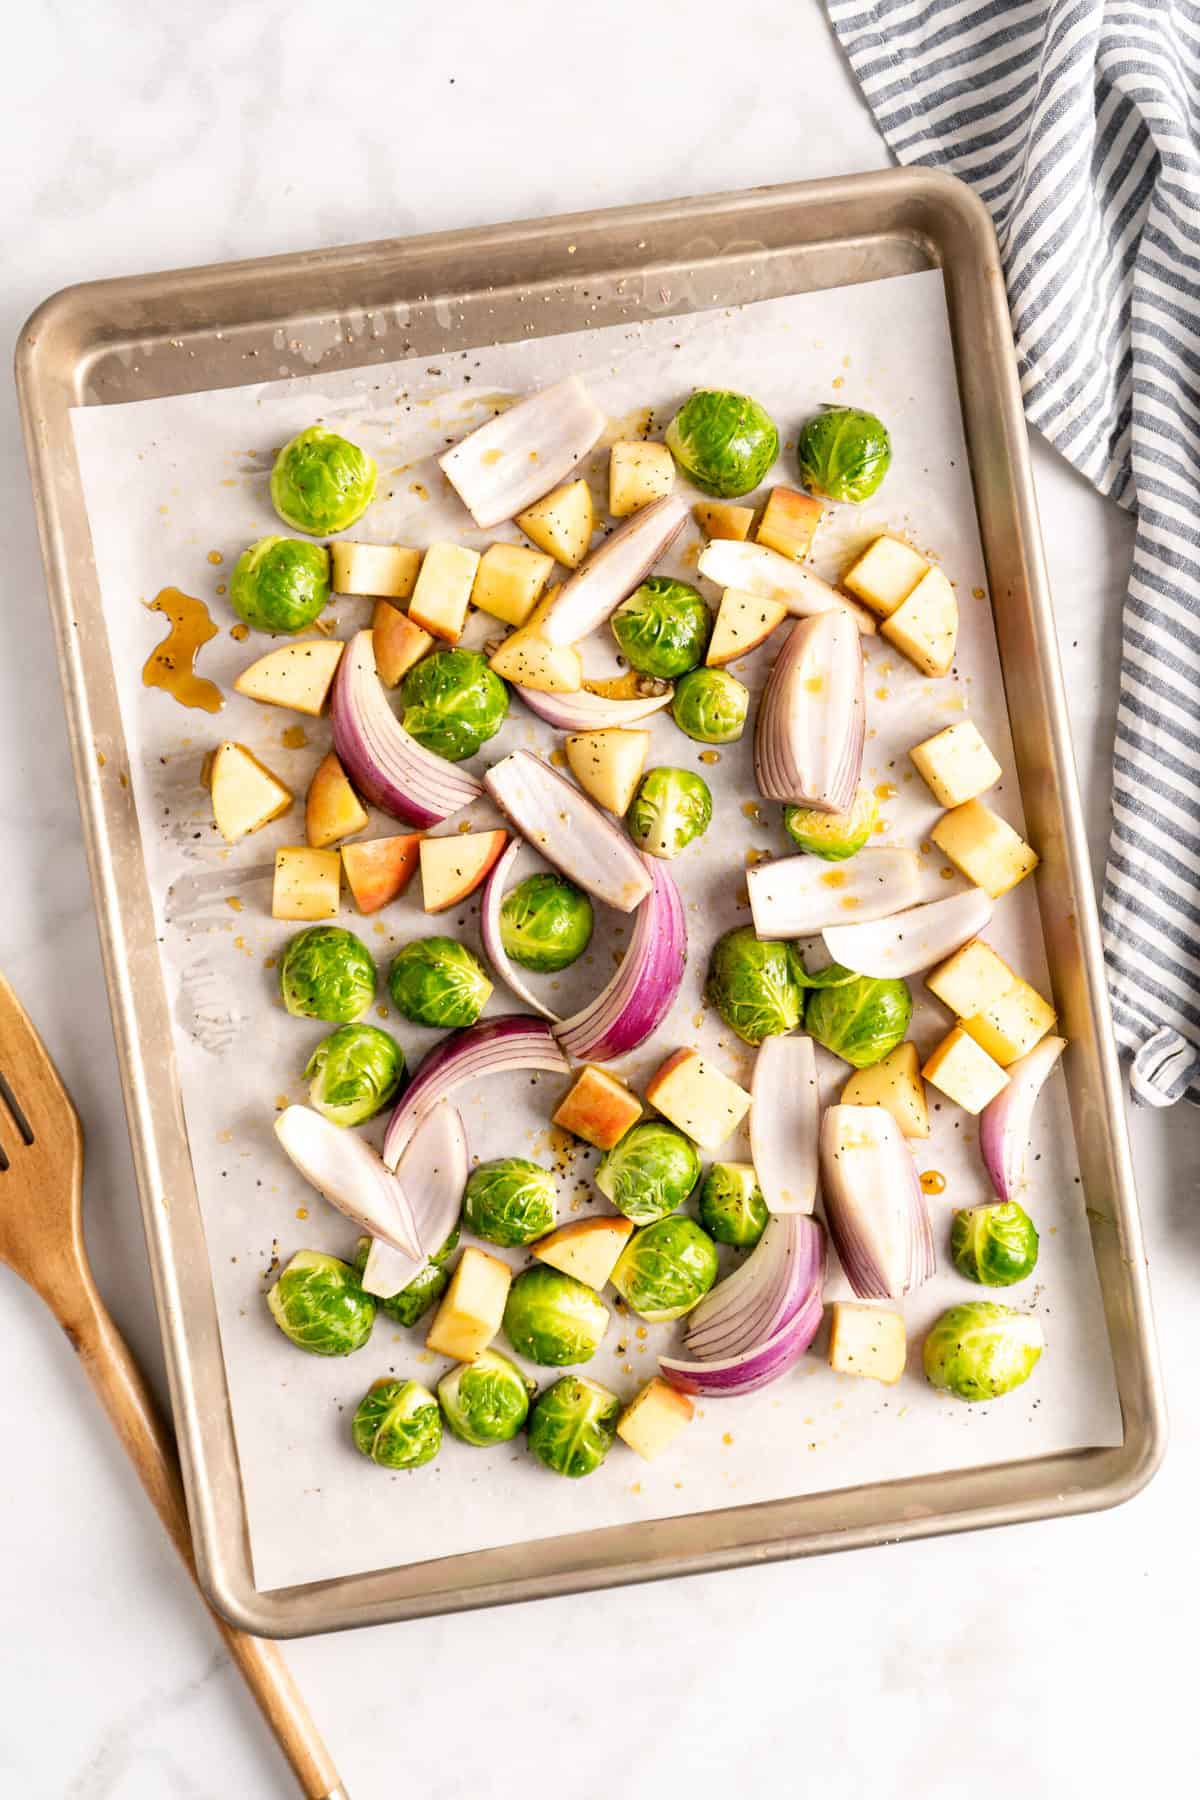 Overhead view of apples, Brussels sprouts, and red onions on parchment lined sheet pan